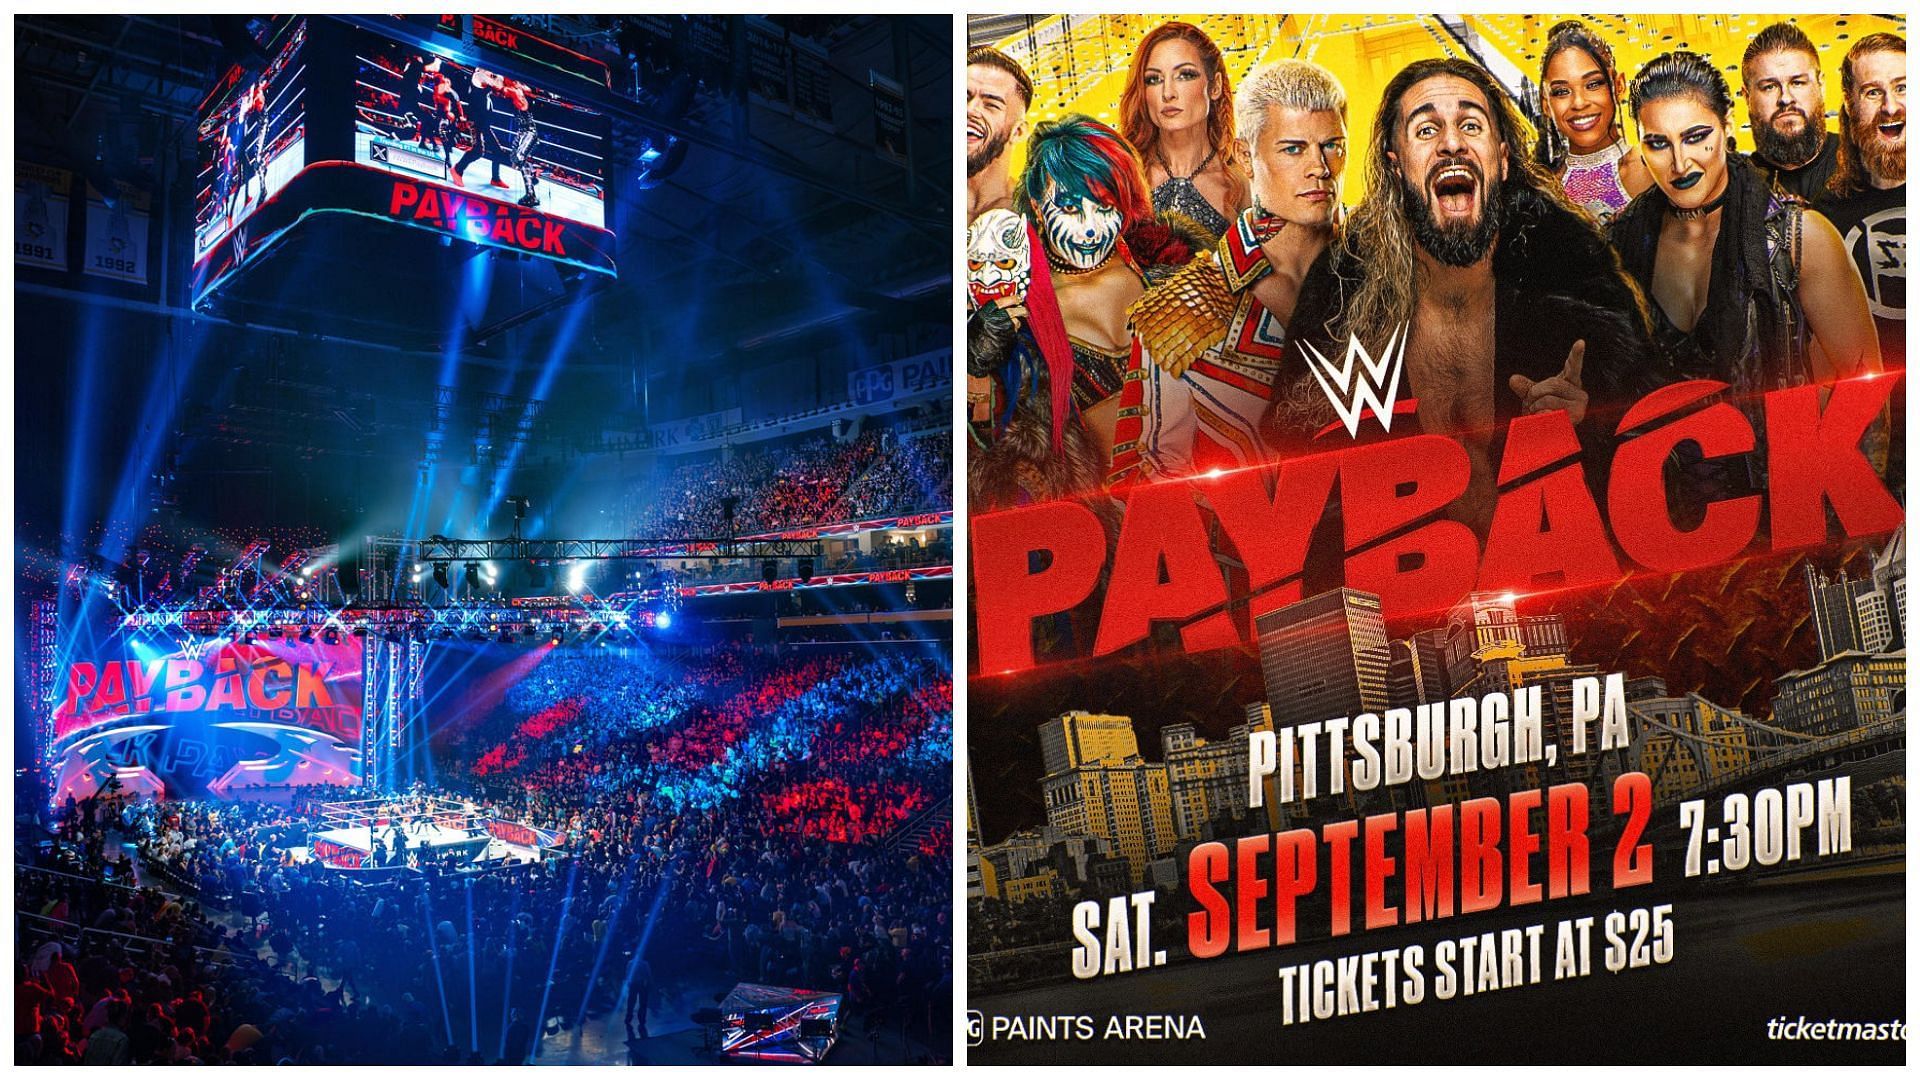 The 2023 Payback was on September 2nd.